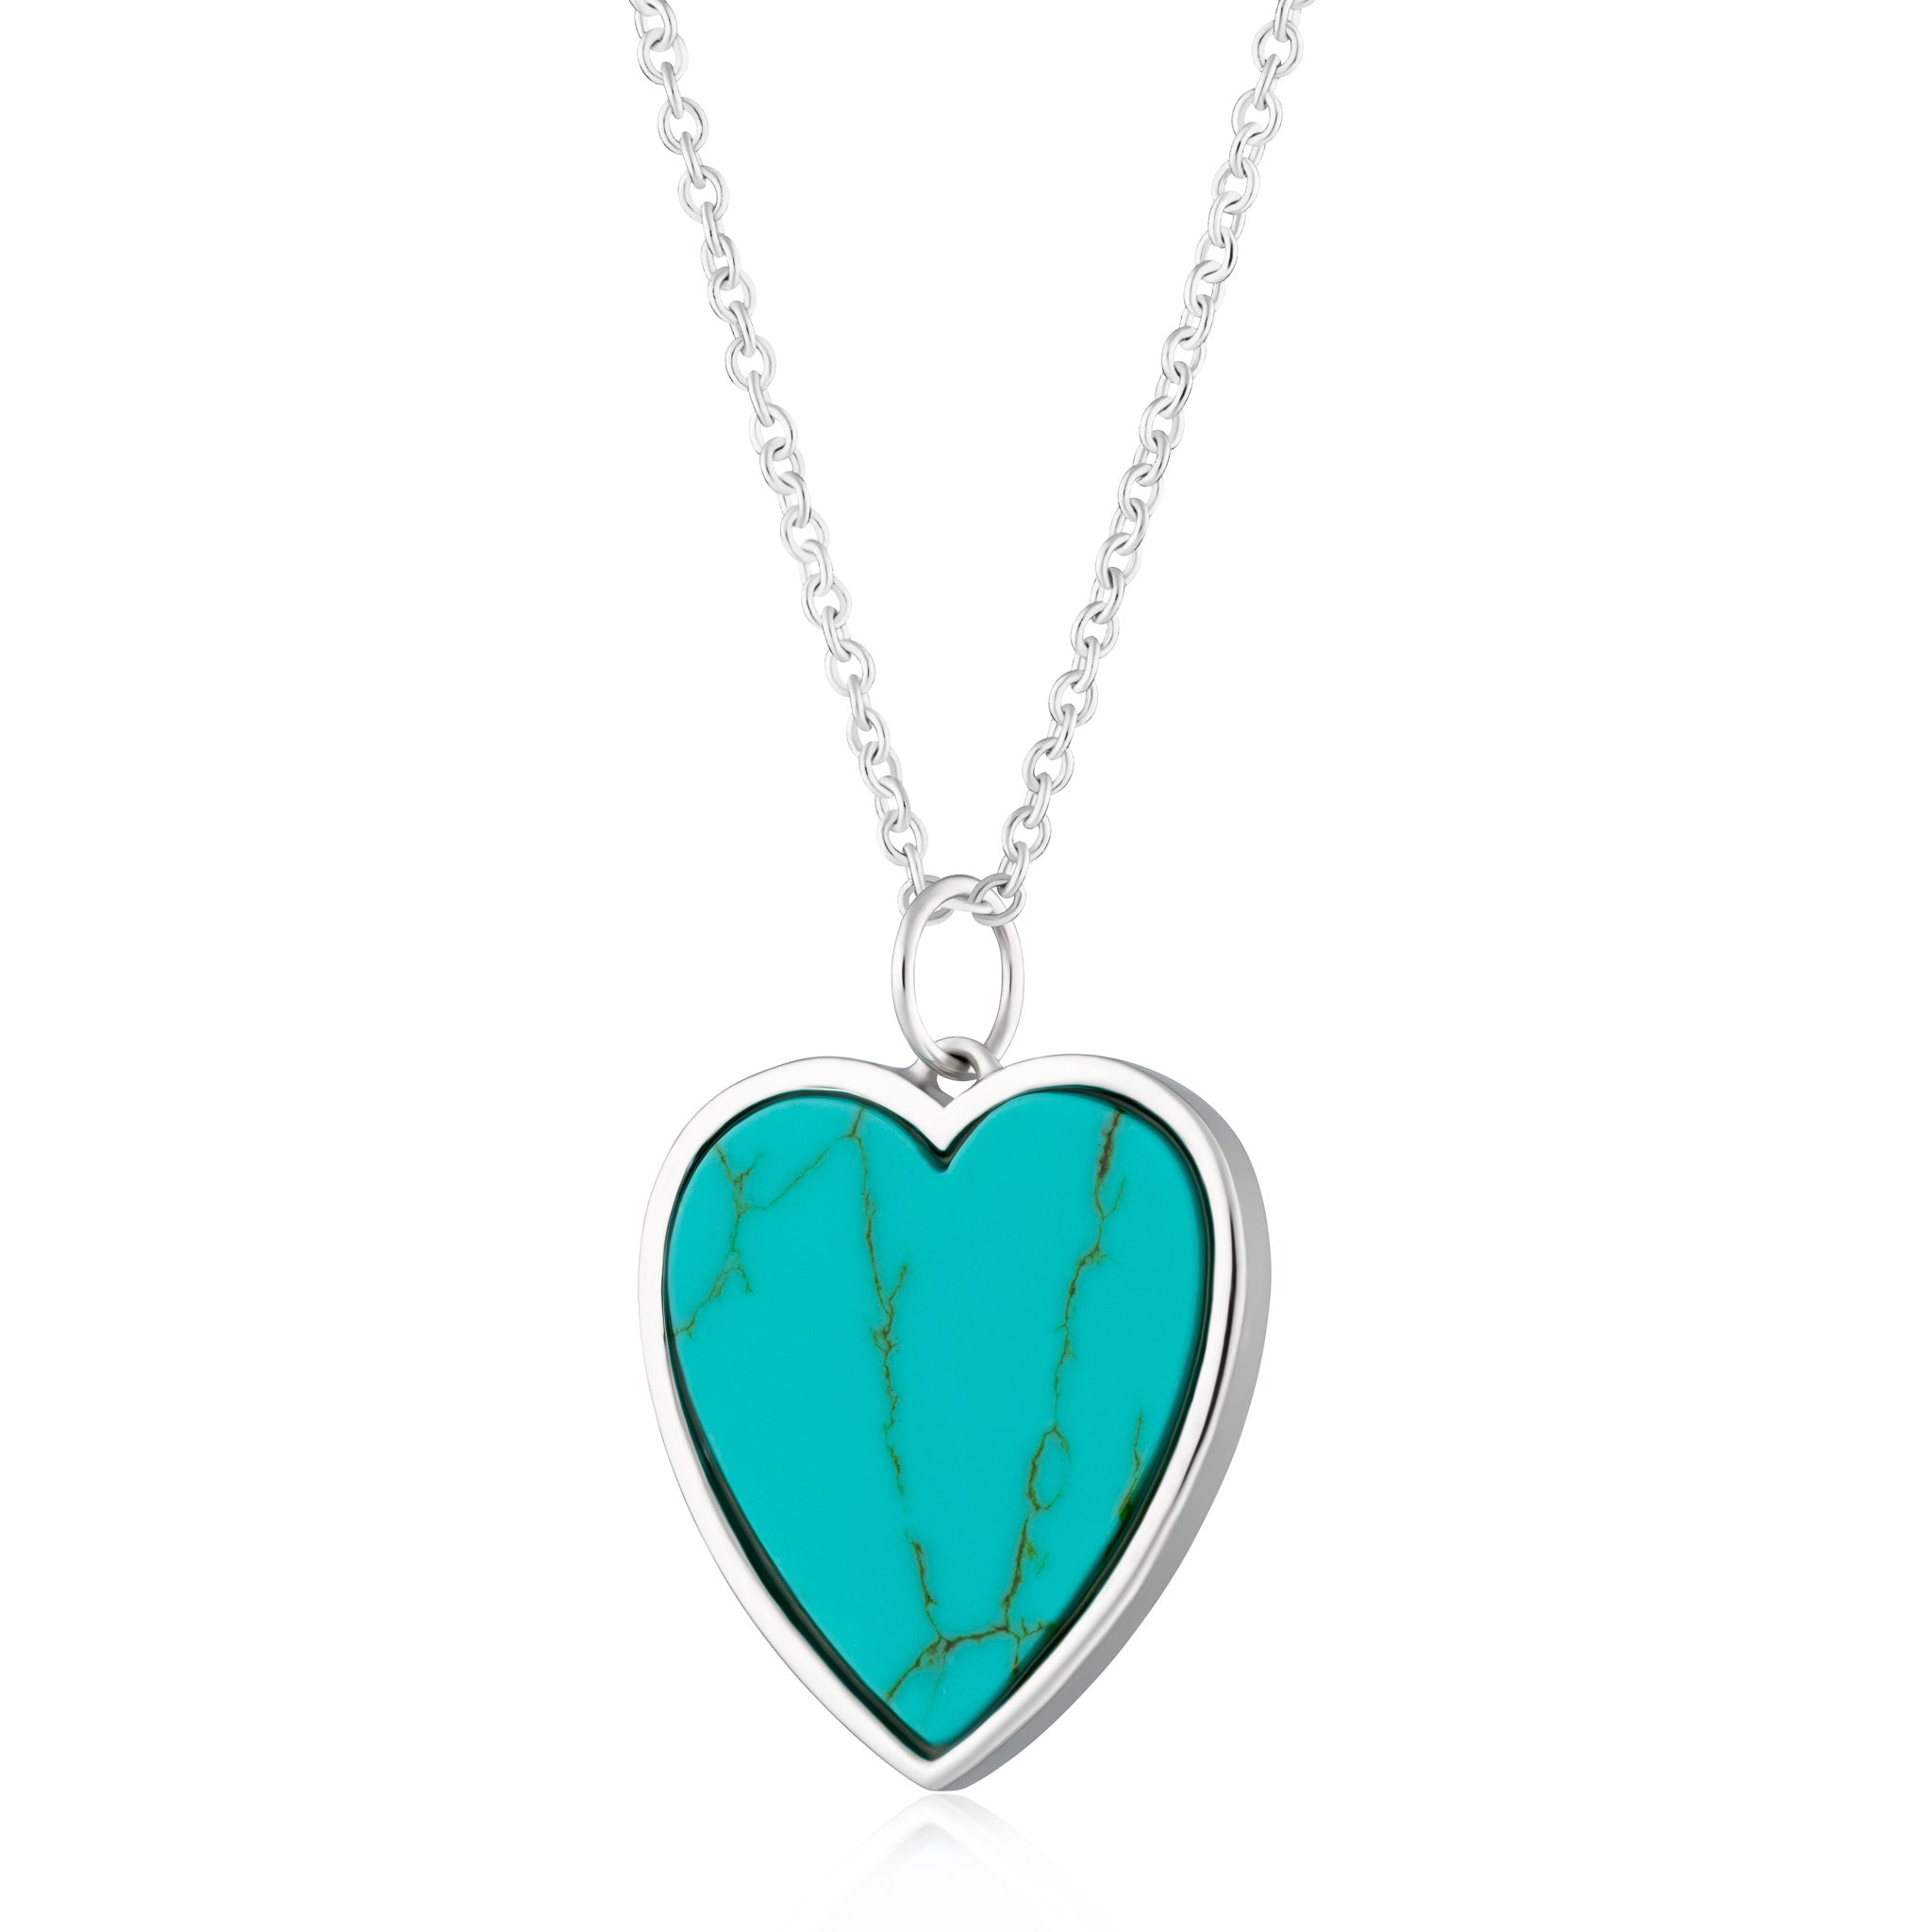 Turquoise Heart Necklace with Slider Clasp